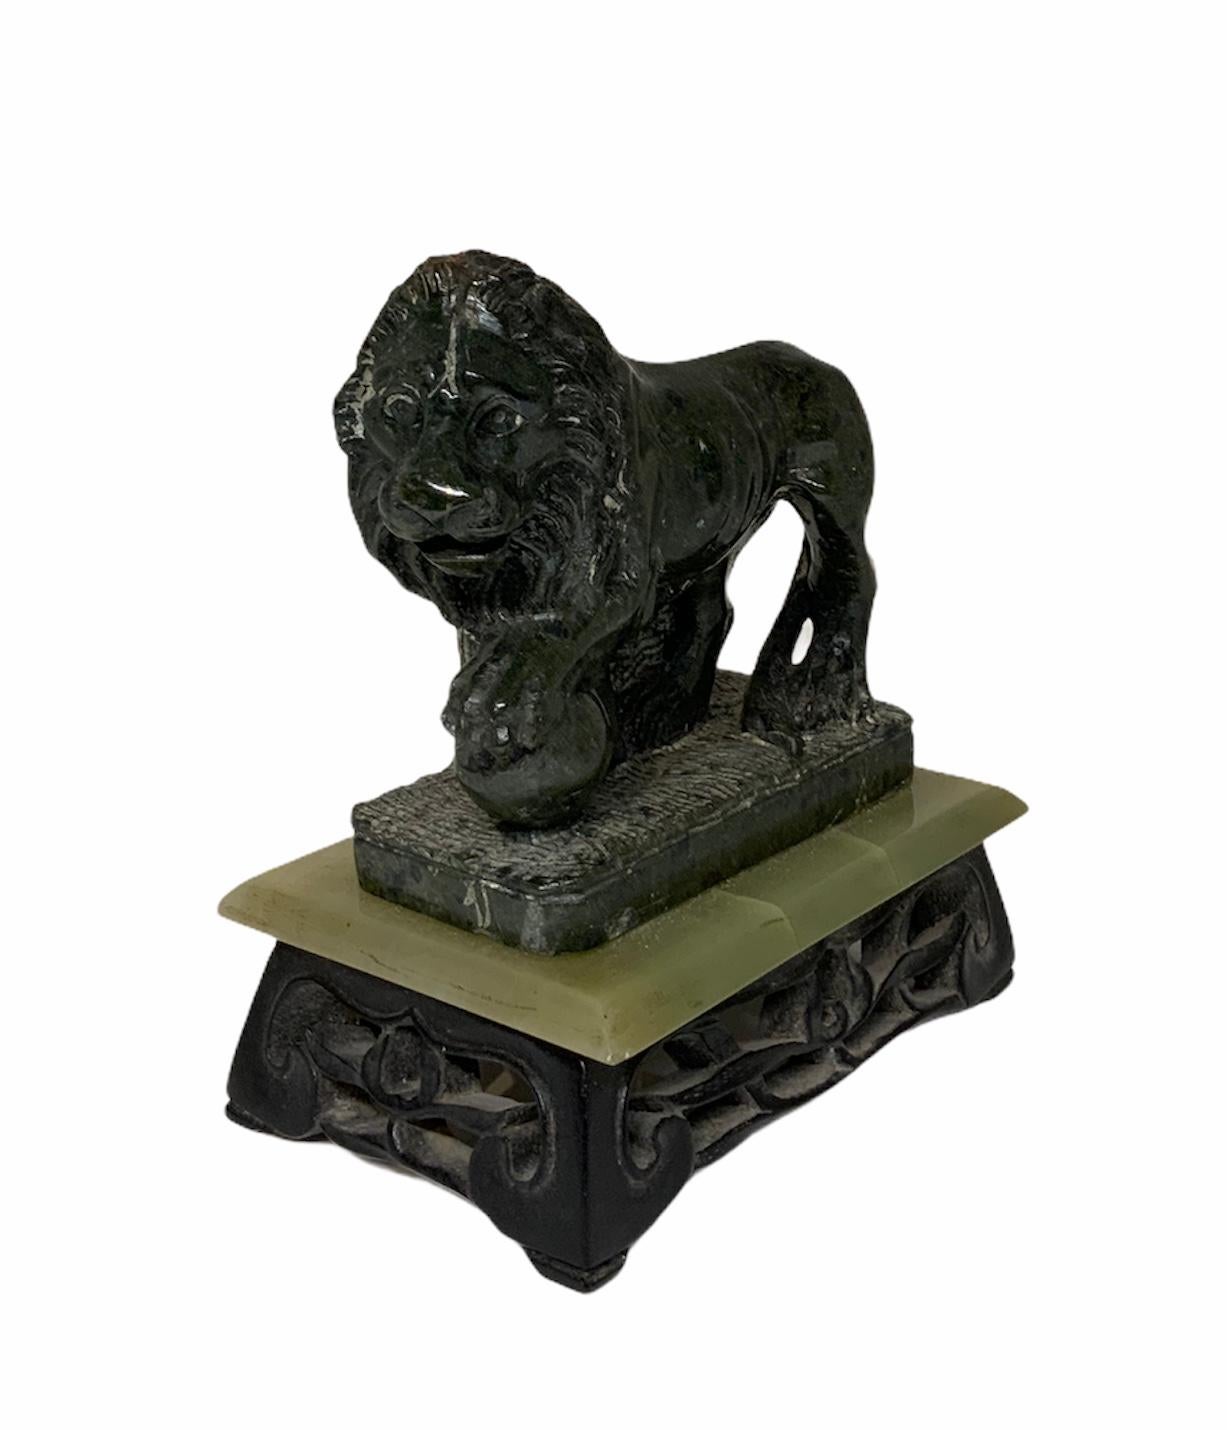 Neoclassical Medici Lion Stone Sculpture After the Antique Ones in Florence